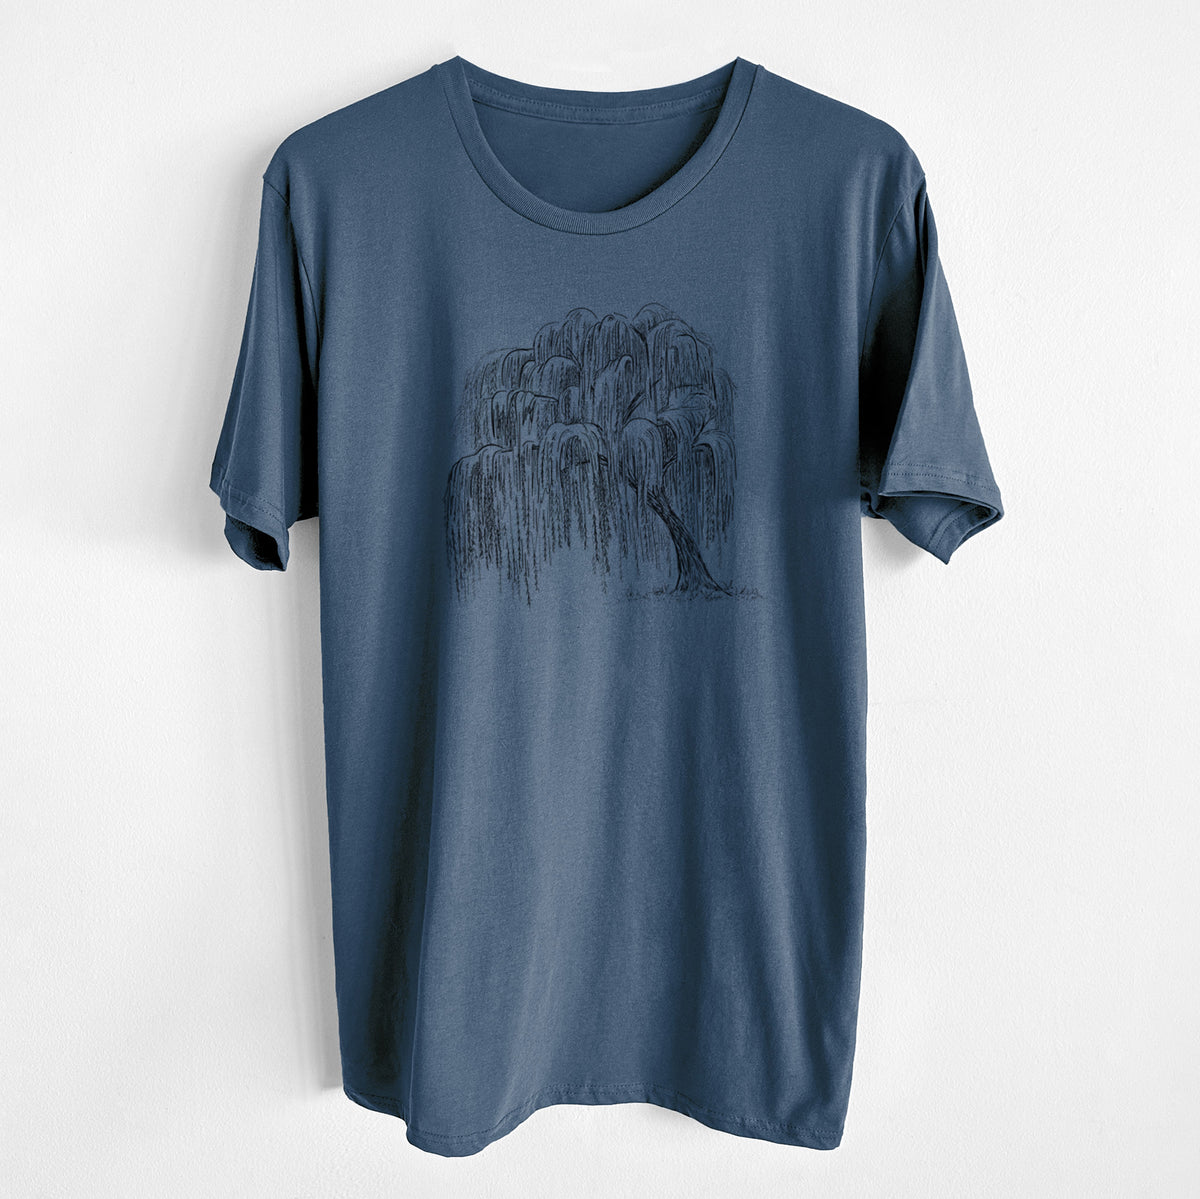 Weeping Willow - Salix babylonica - Unisex Crewneck - Made in USA - 100% Organic Cotton